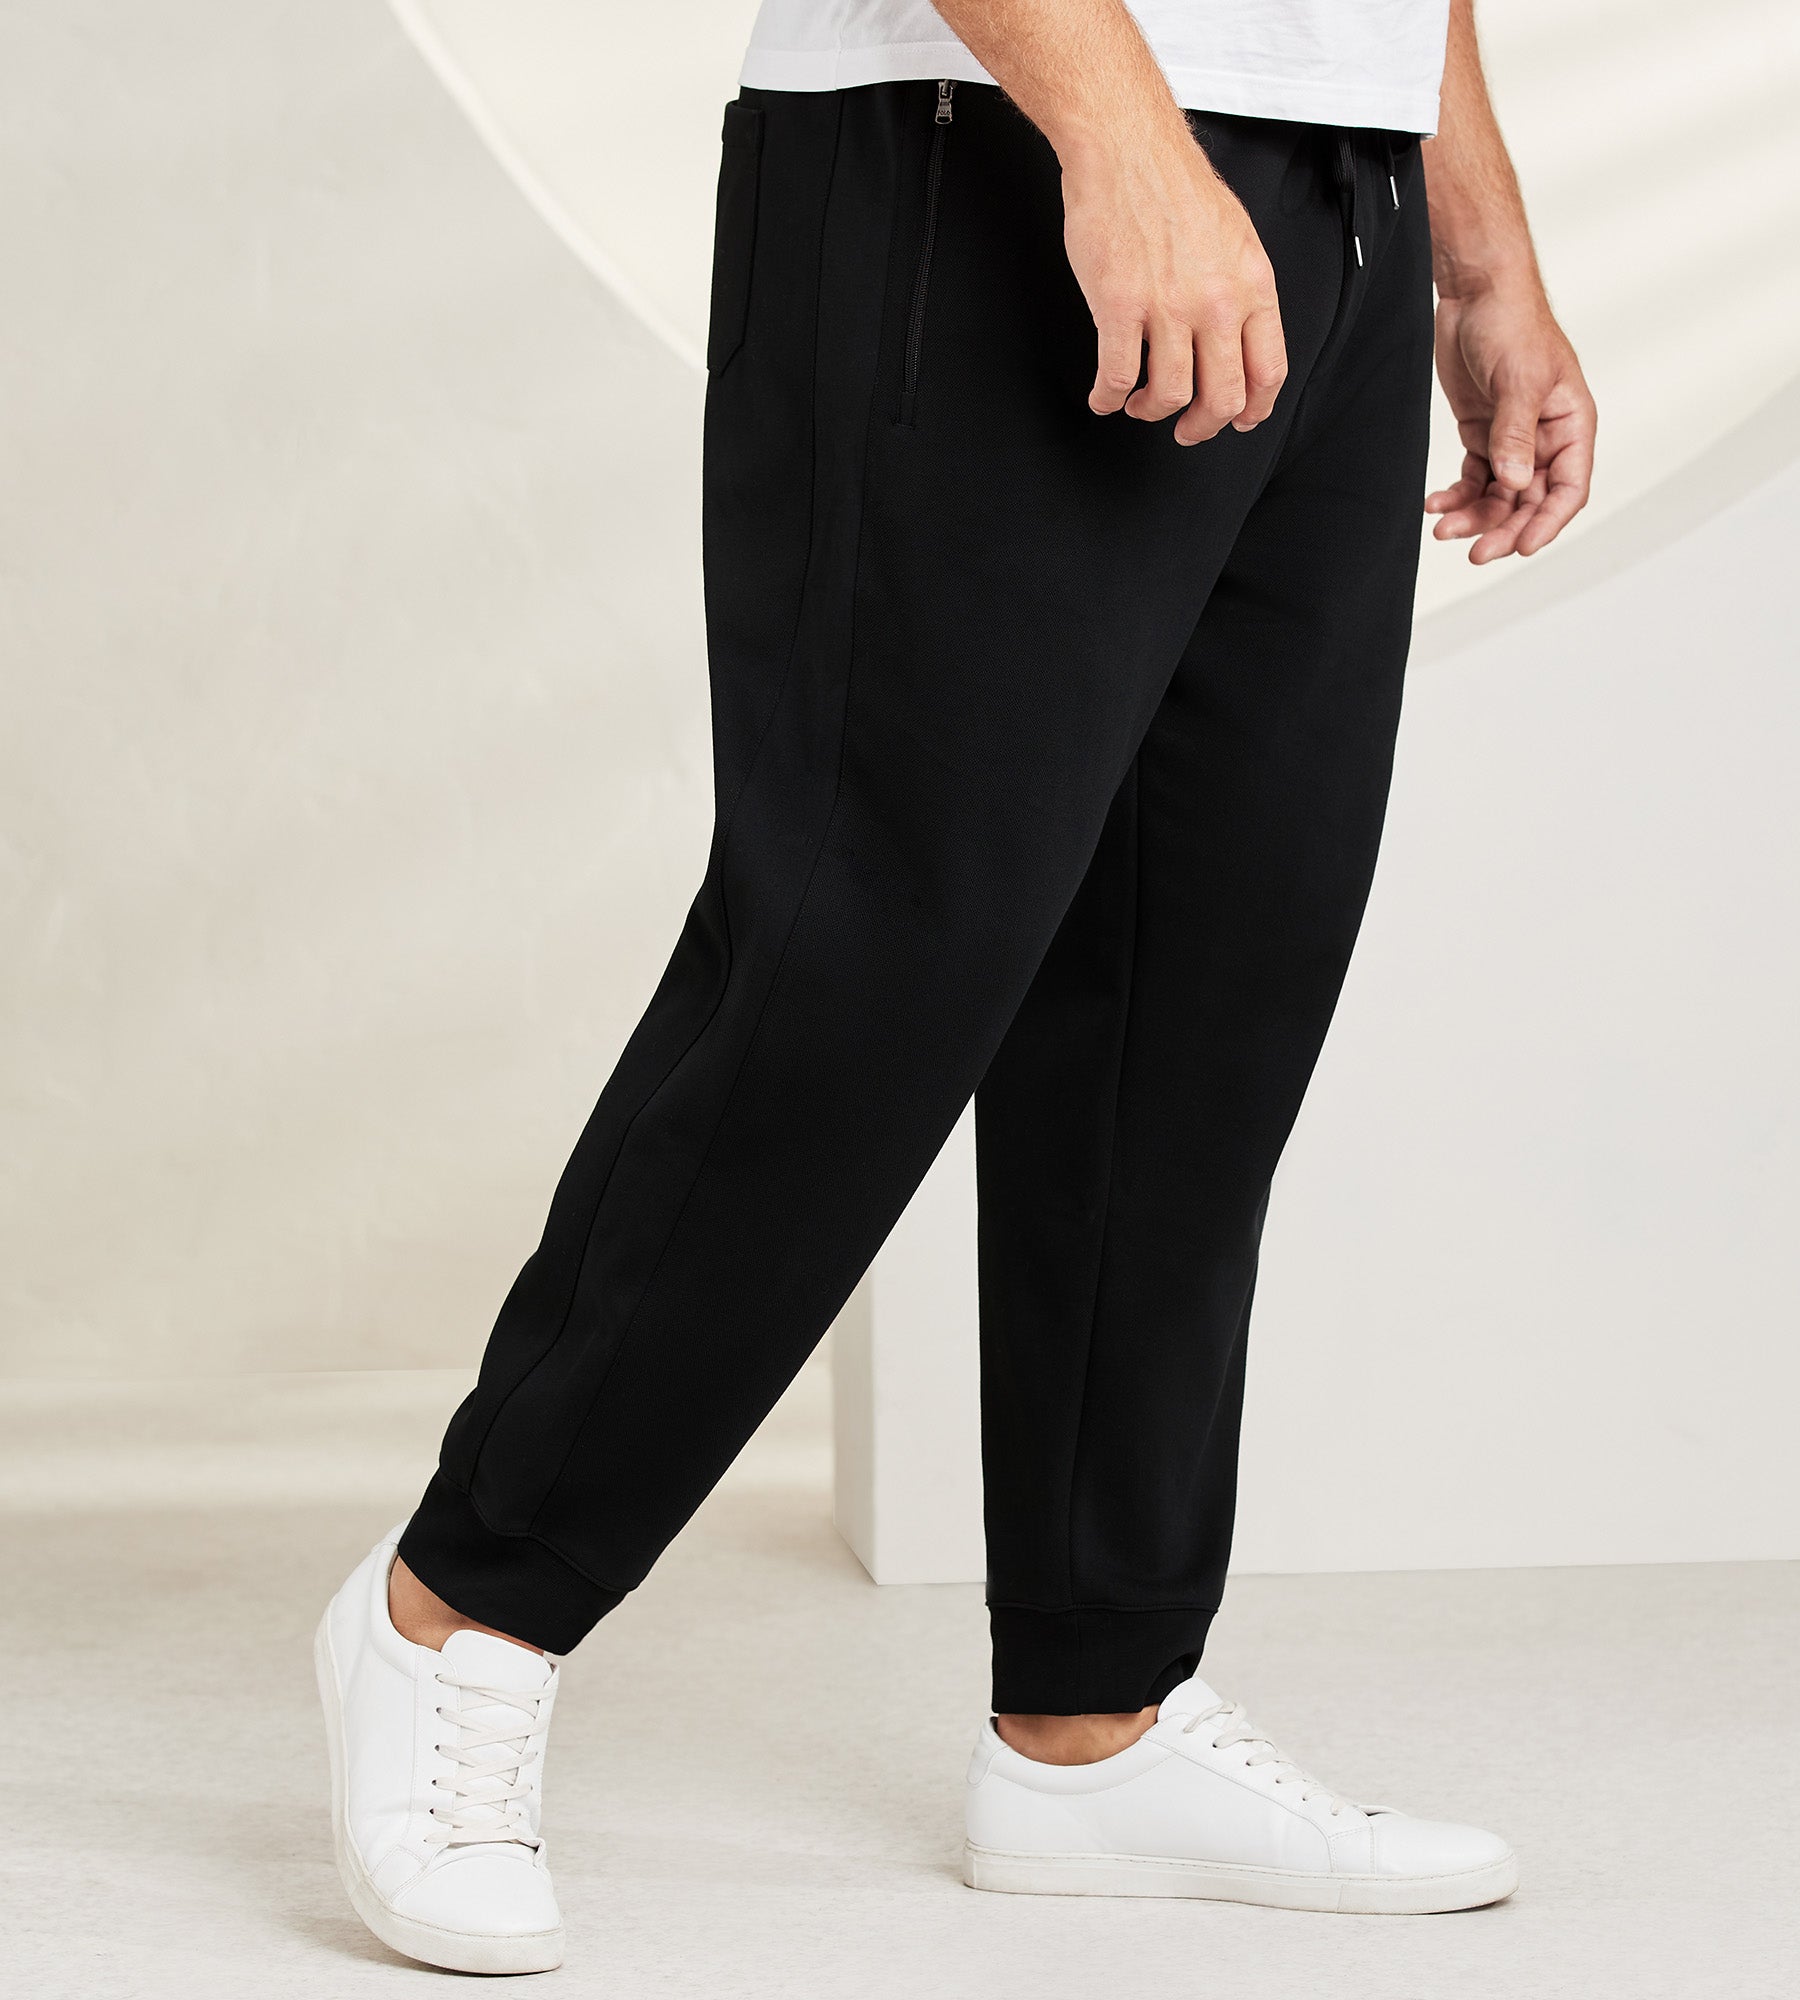 double knit track pants